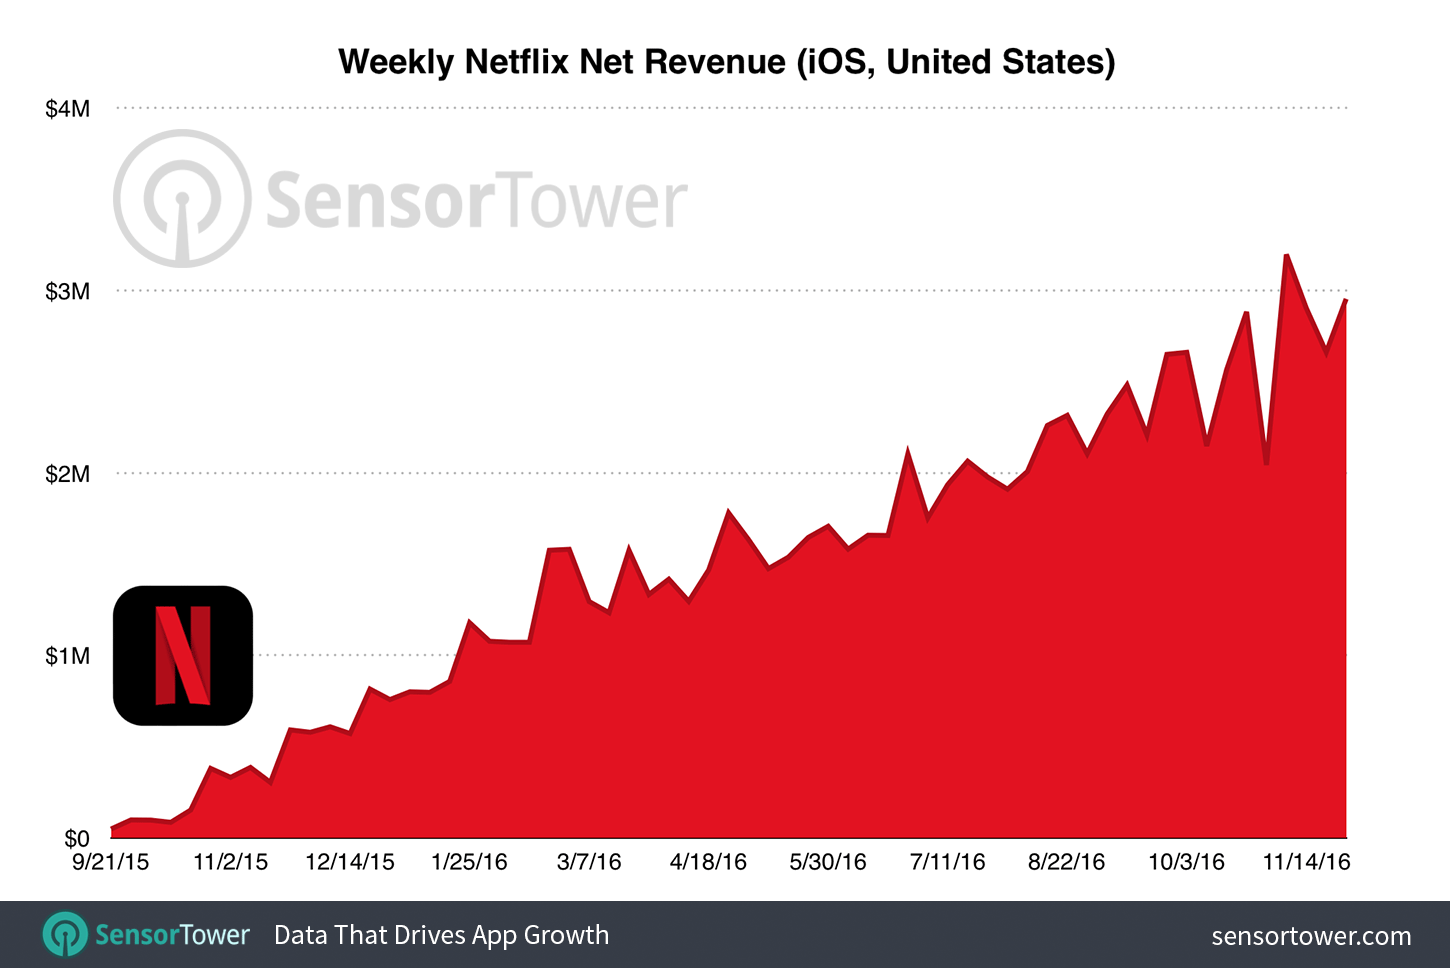 Netflix Weekly Net Revenue on iOS in the United States